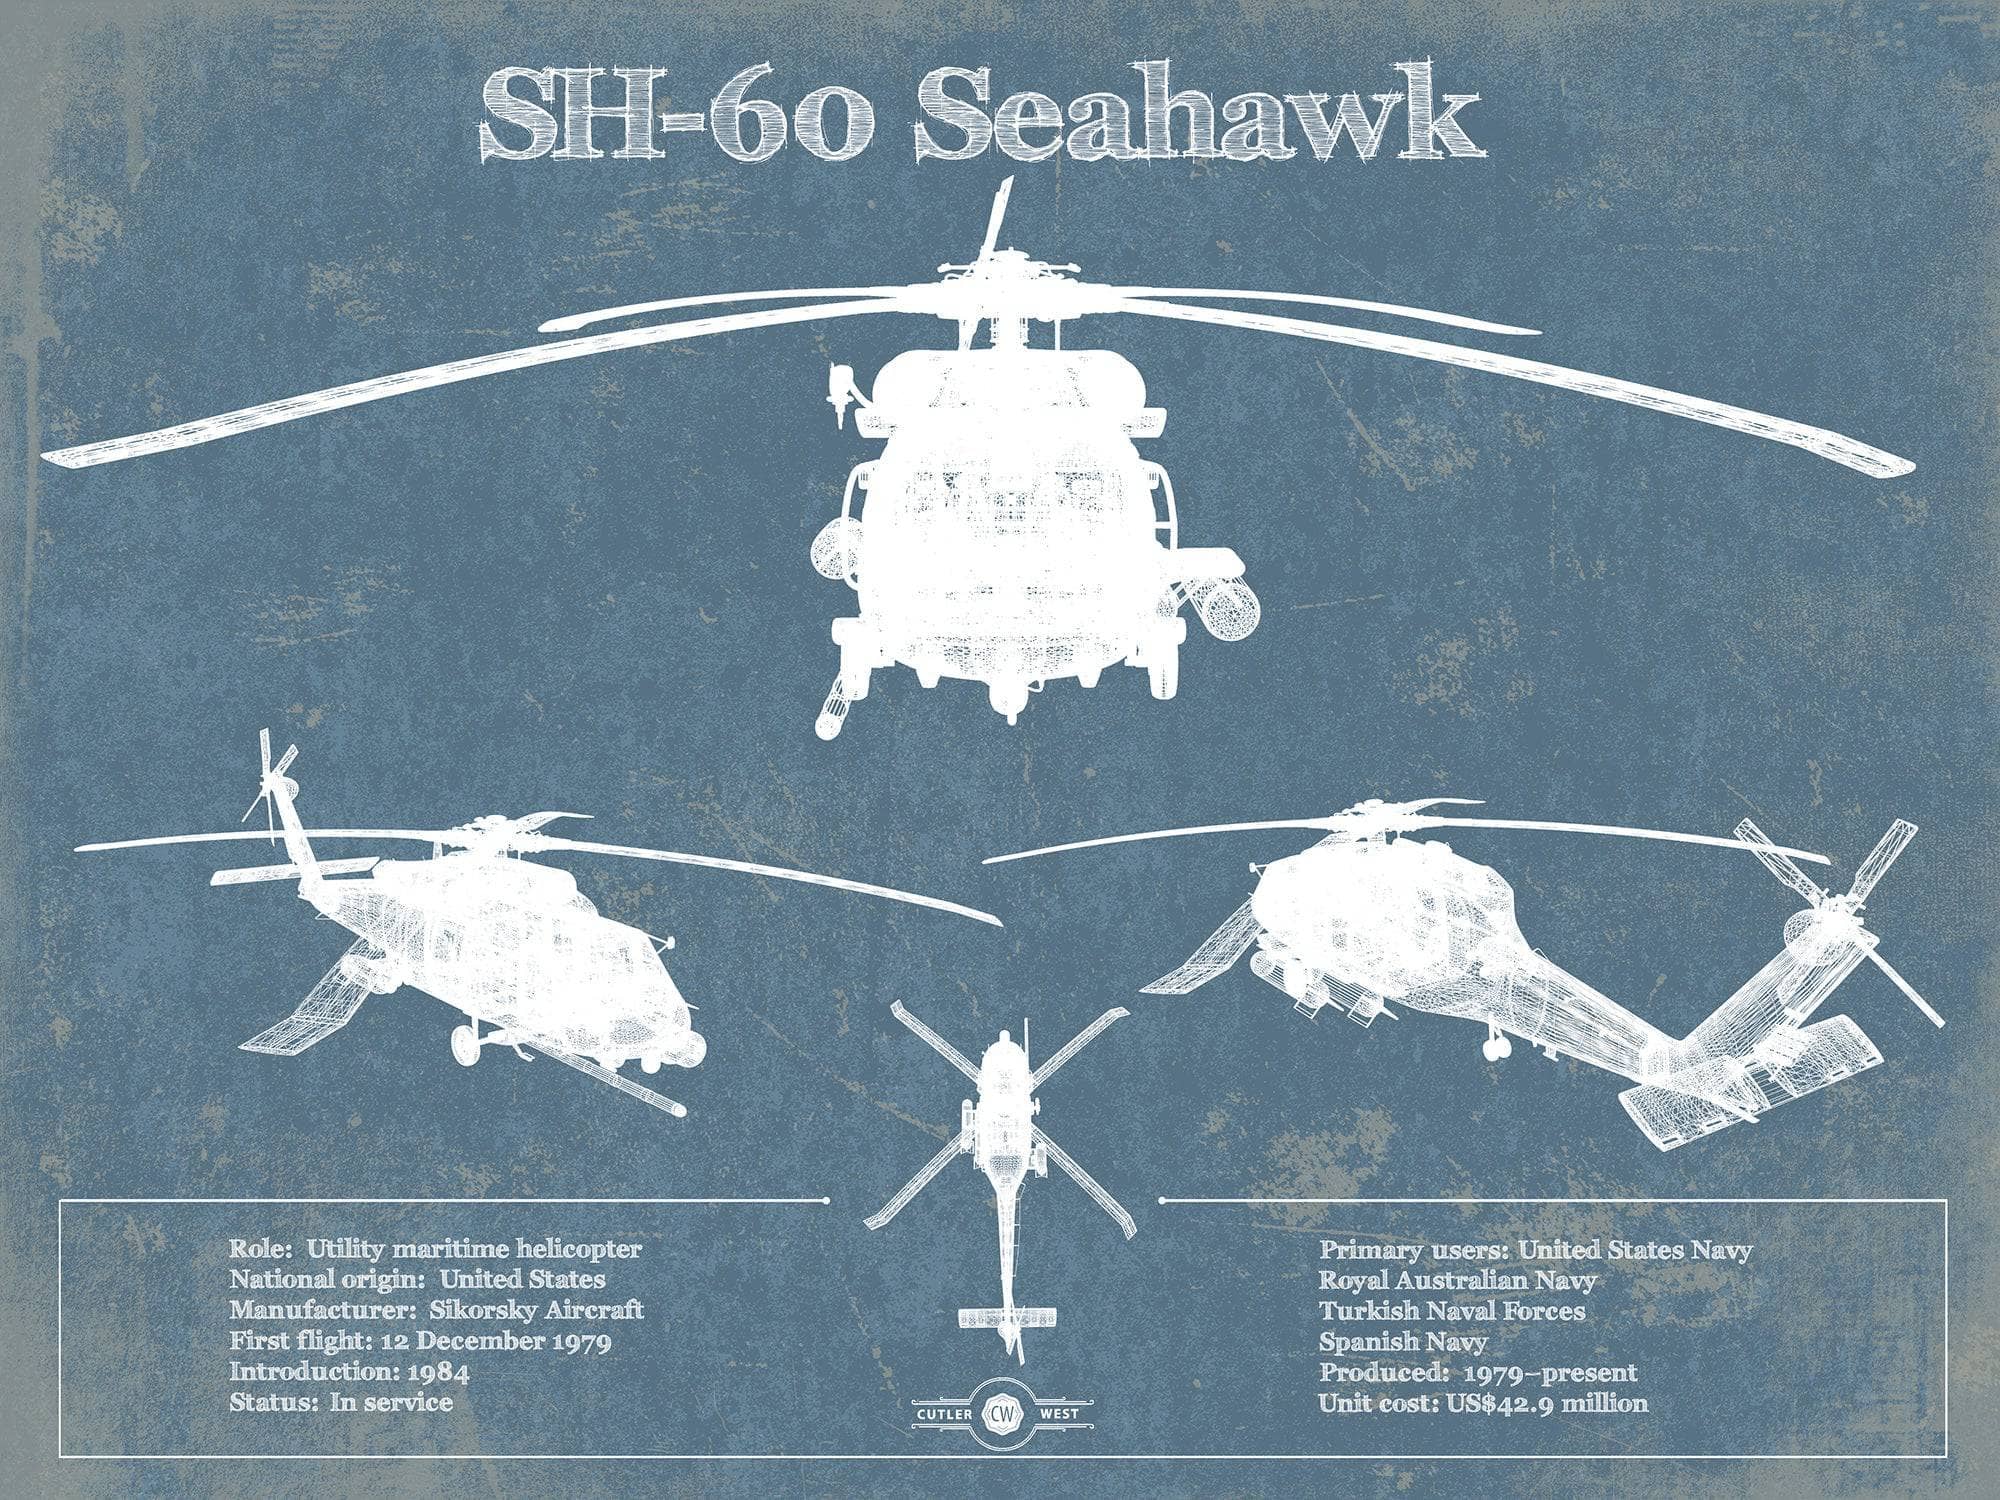 Cutler West Military Aircraft 14" x 11" / Unframed SH-60/MH-60 Seahawk Helicopter Vintage Aviation Blueprint Military Print 833447904_25060